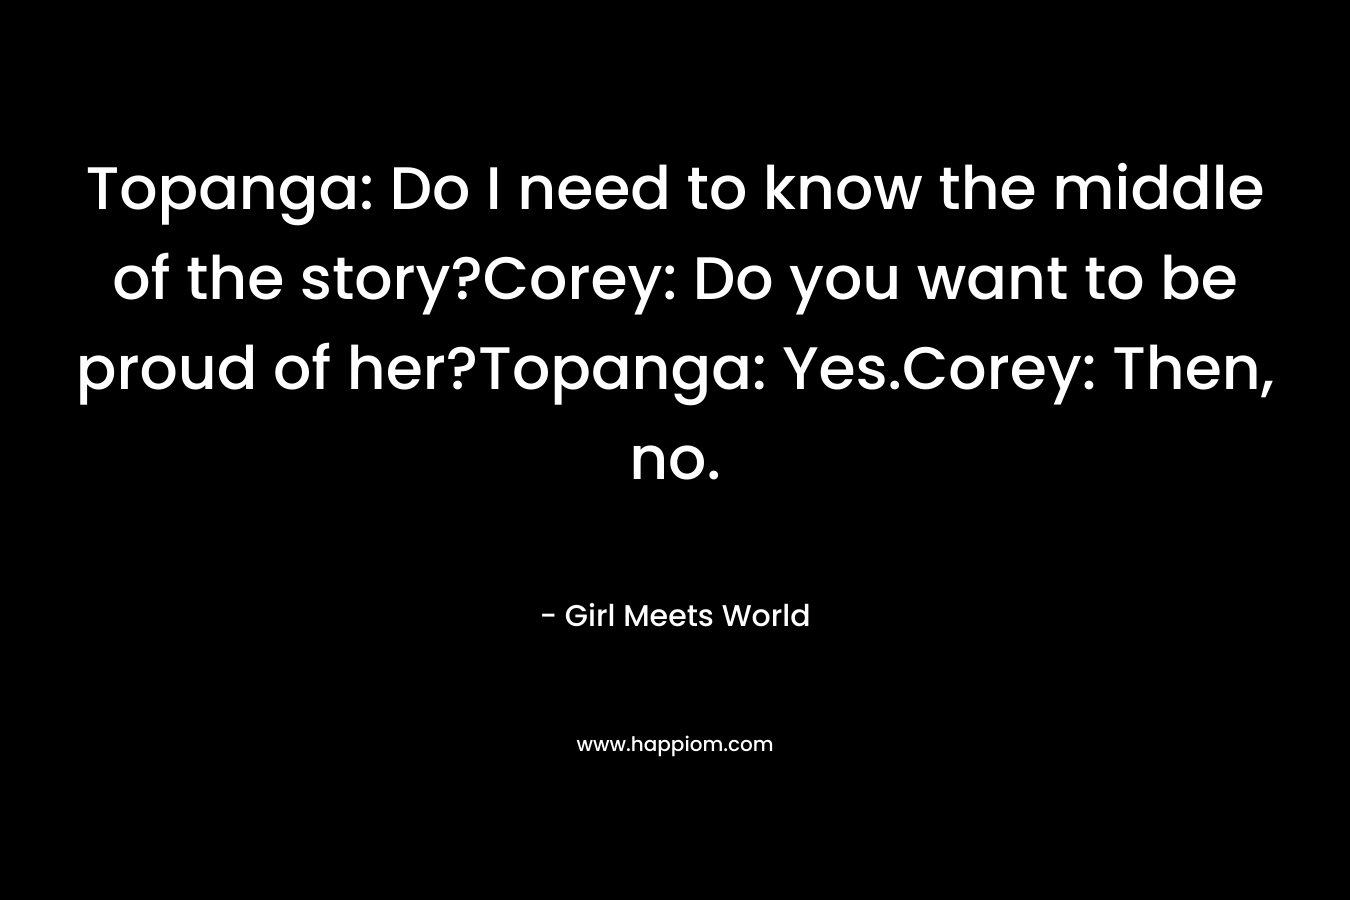 Topanga: Do I need to know the middle of the story?Corey: Do you want to be proud of her?Topanga: Yes.Corey: Then, no.